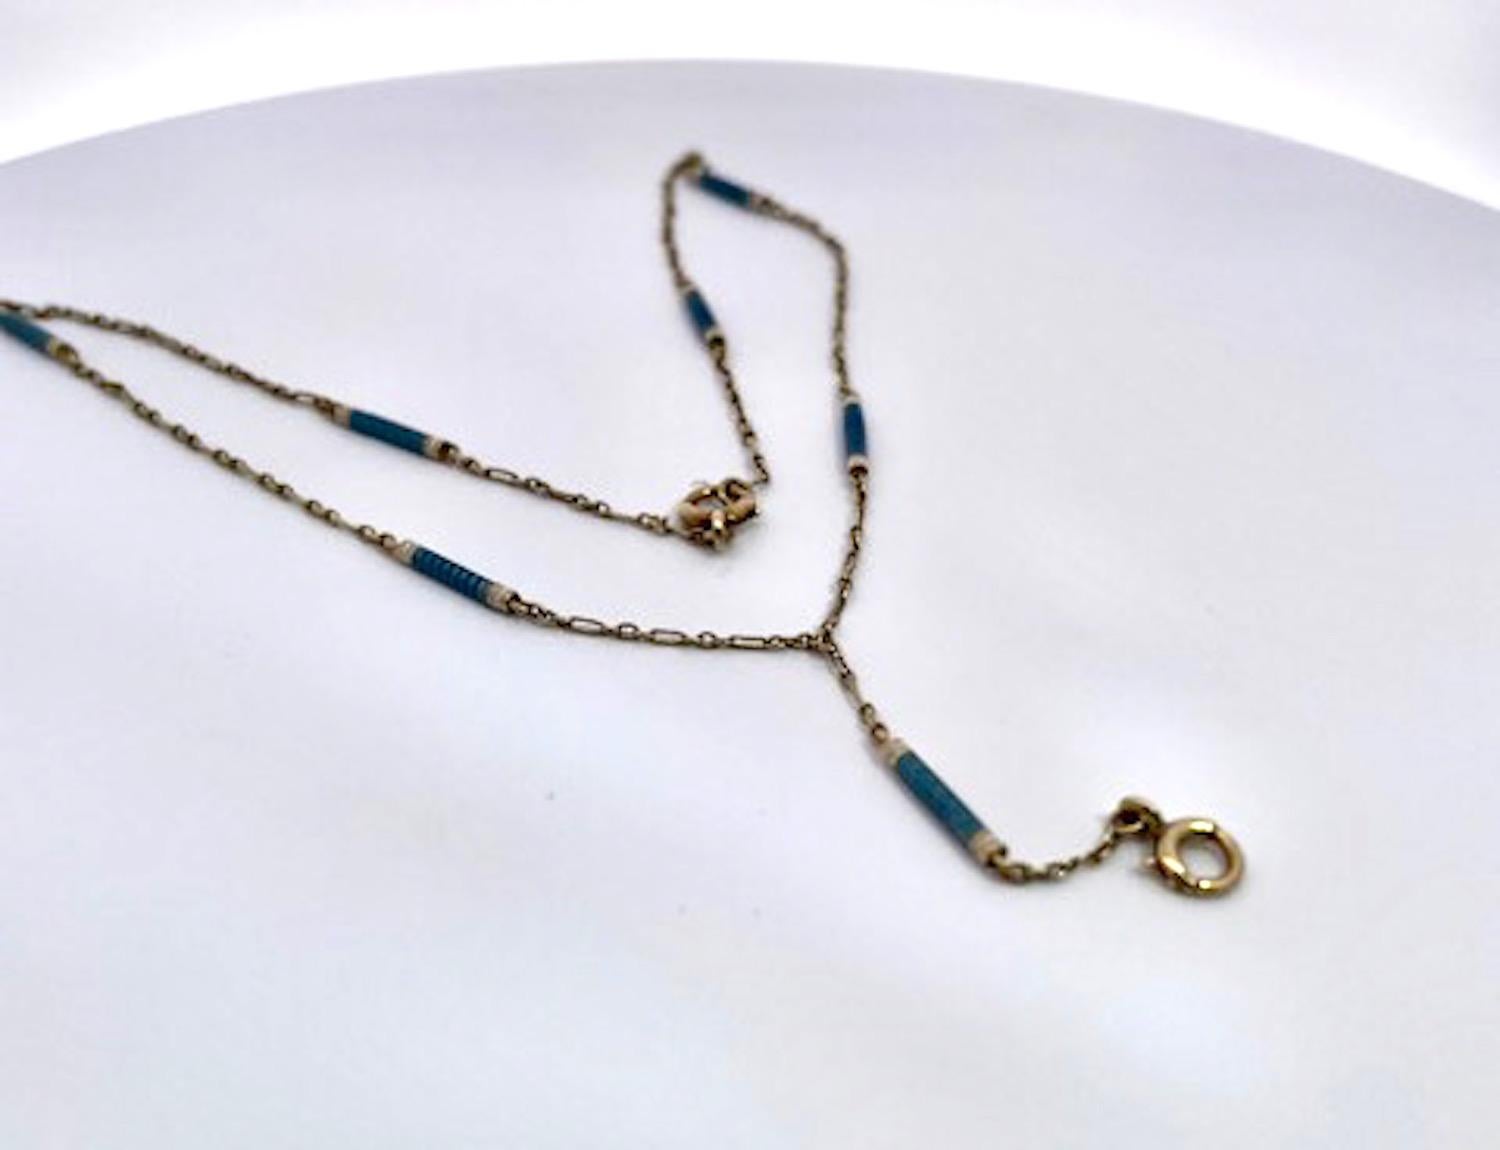 14K Enamel Baton Chain circa 1910 In Good Condition For Sale In North Hollywood, CA